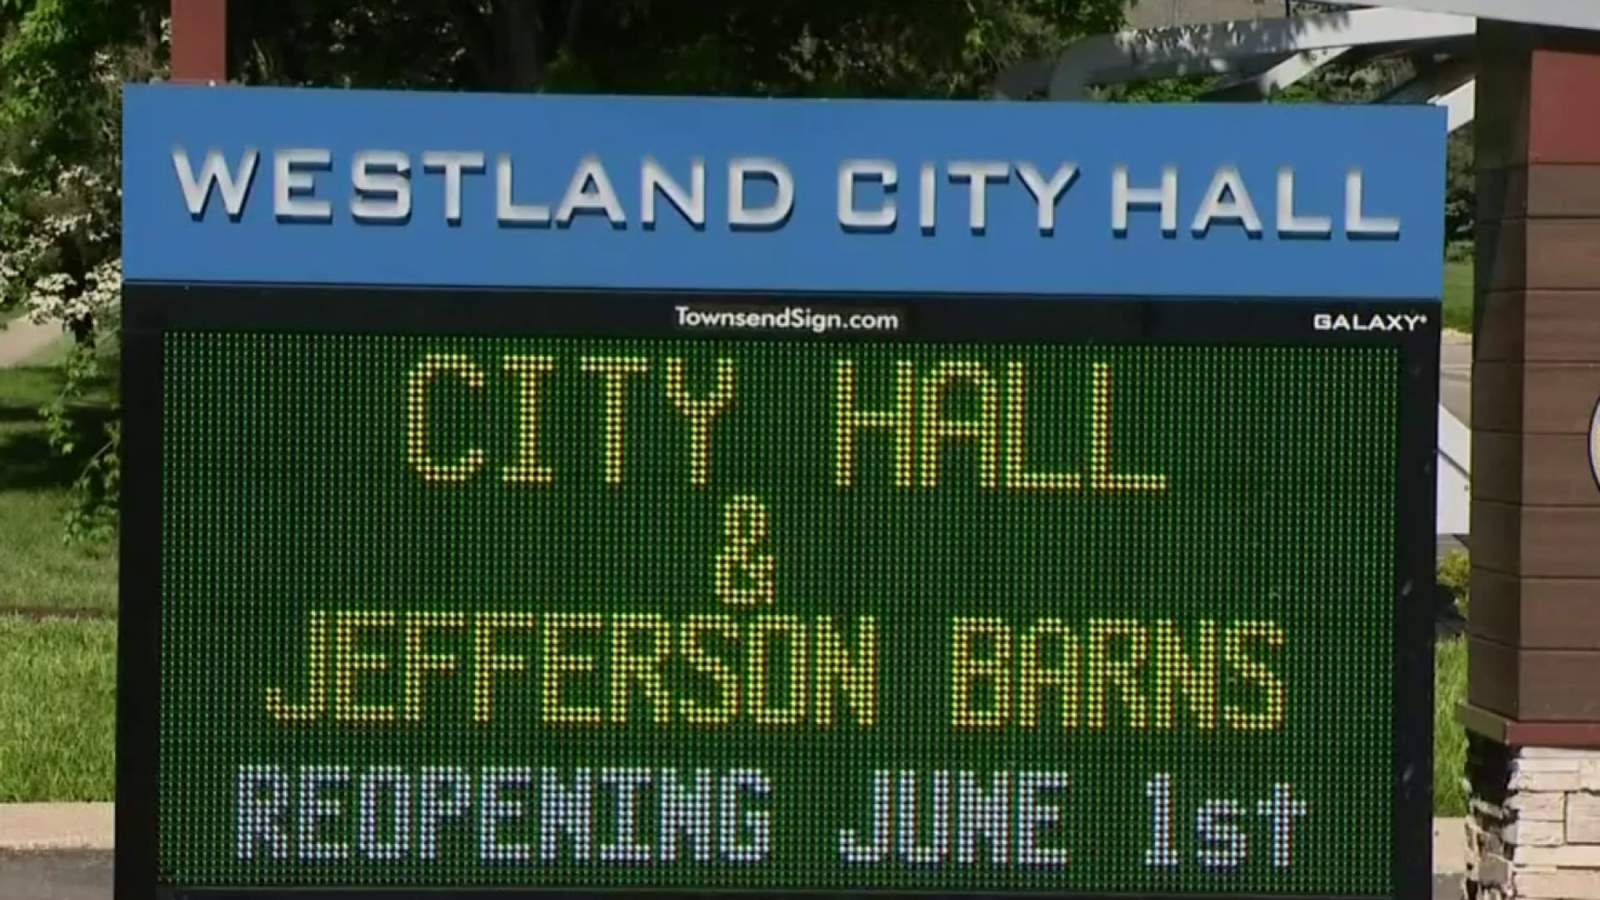 Westland City Hall reopens for the first time in months amid COVID-19 pandemic